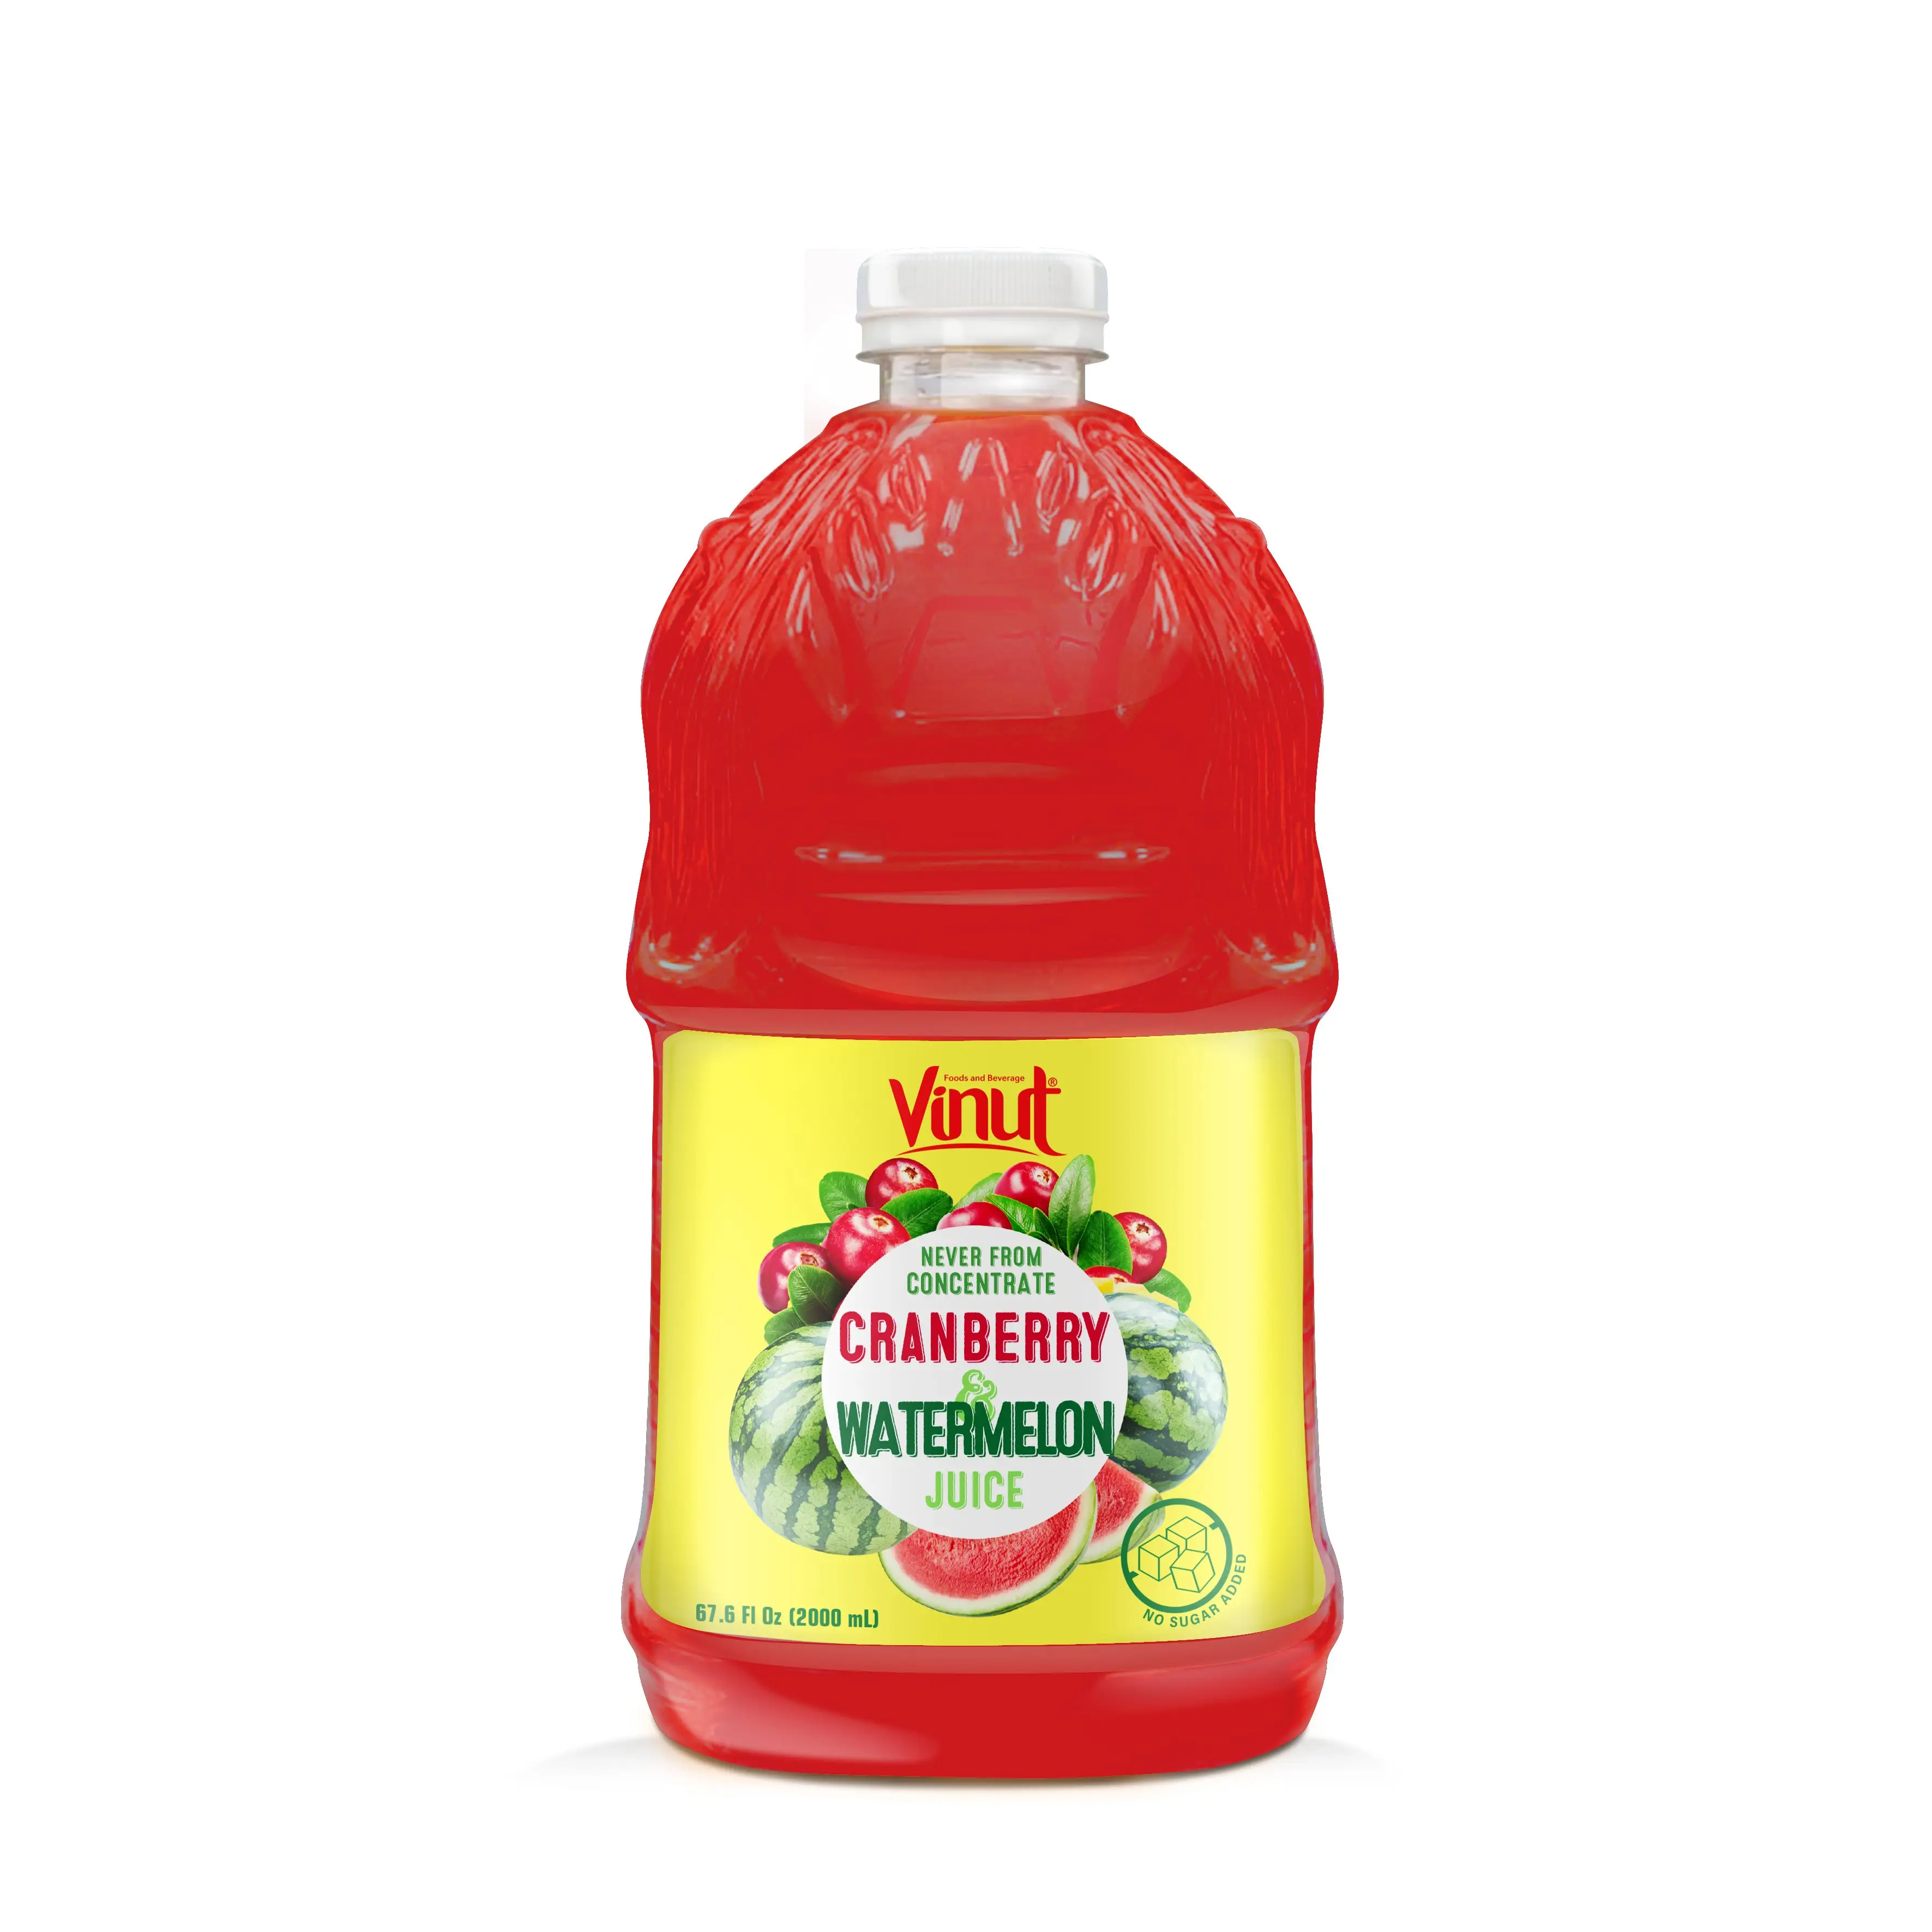 2000ml VINUT Cranberry Juice and Watermelon Juice No added sugars Never from Concentrate Special drinks for Christmas